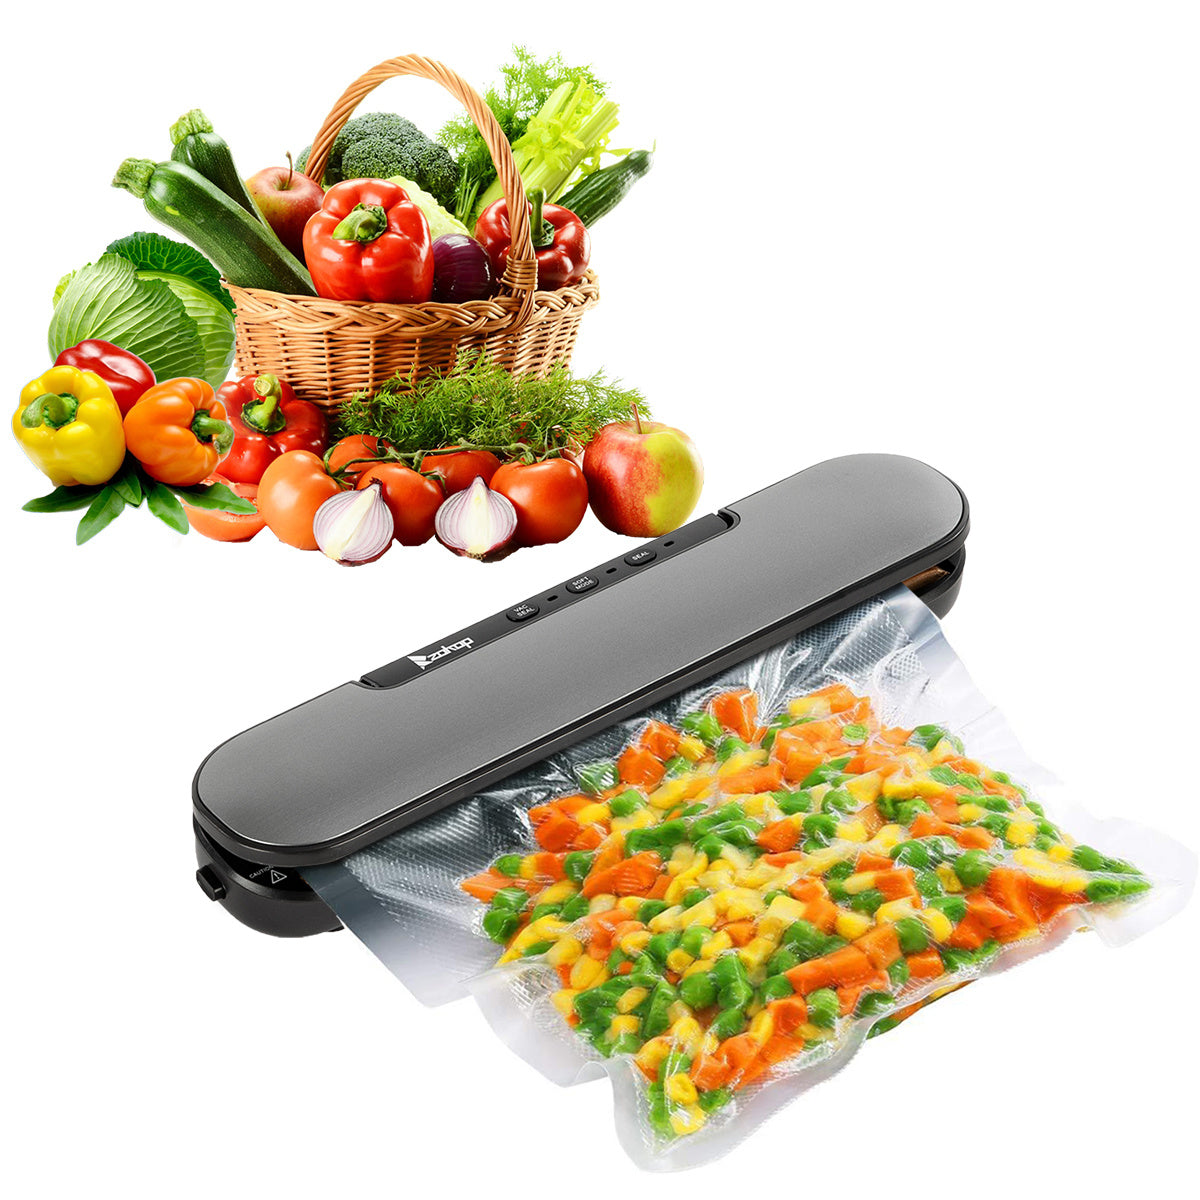 Zokop V69 Portable Food Vacuum Sealer Machine for Food Saver Storage with Magnets and 10 Bags Silver Gray YF